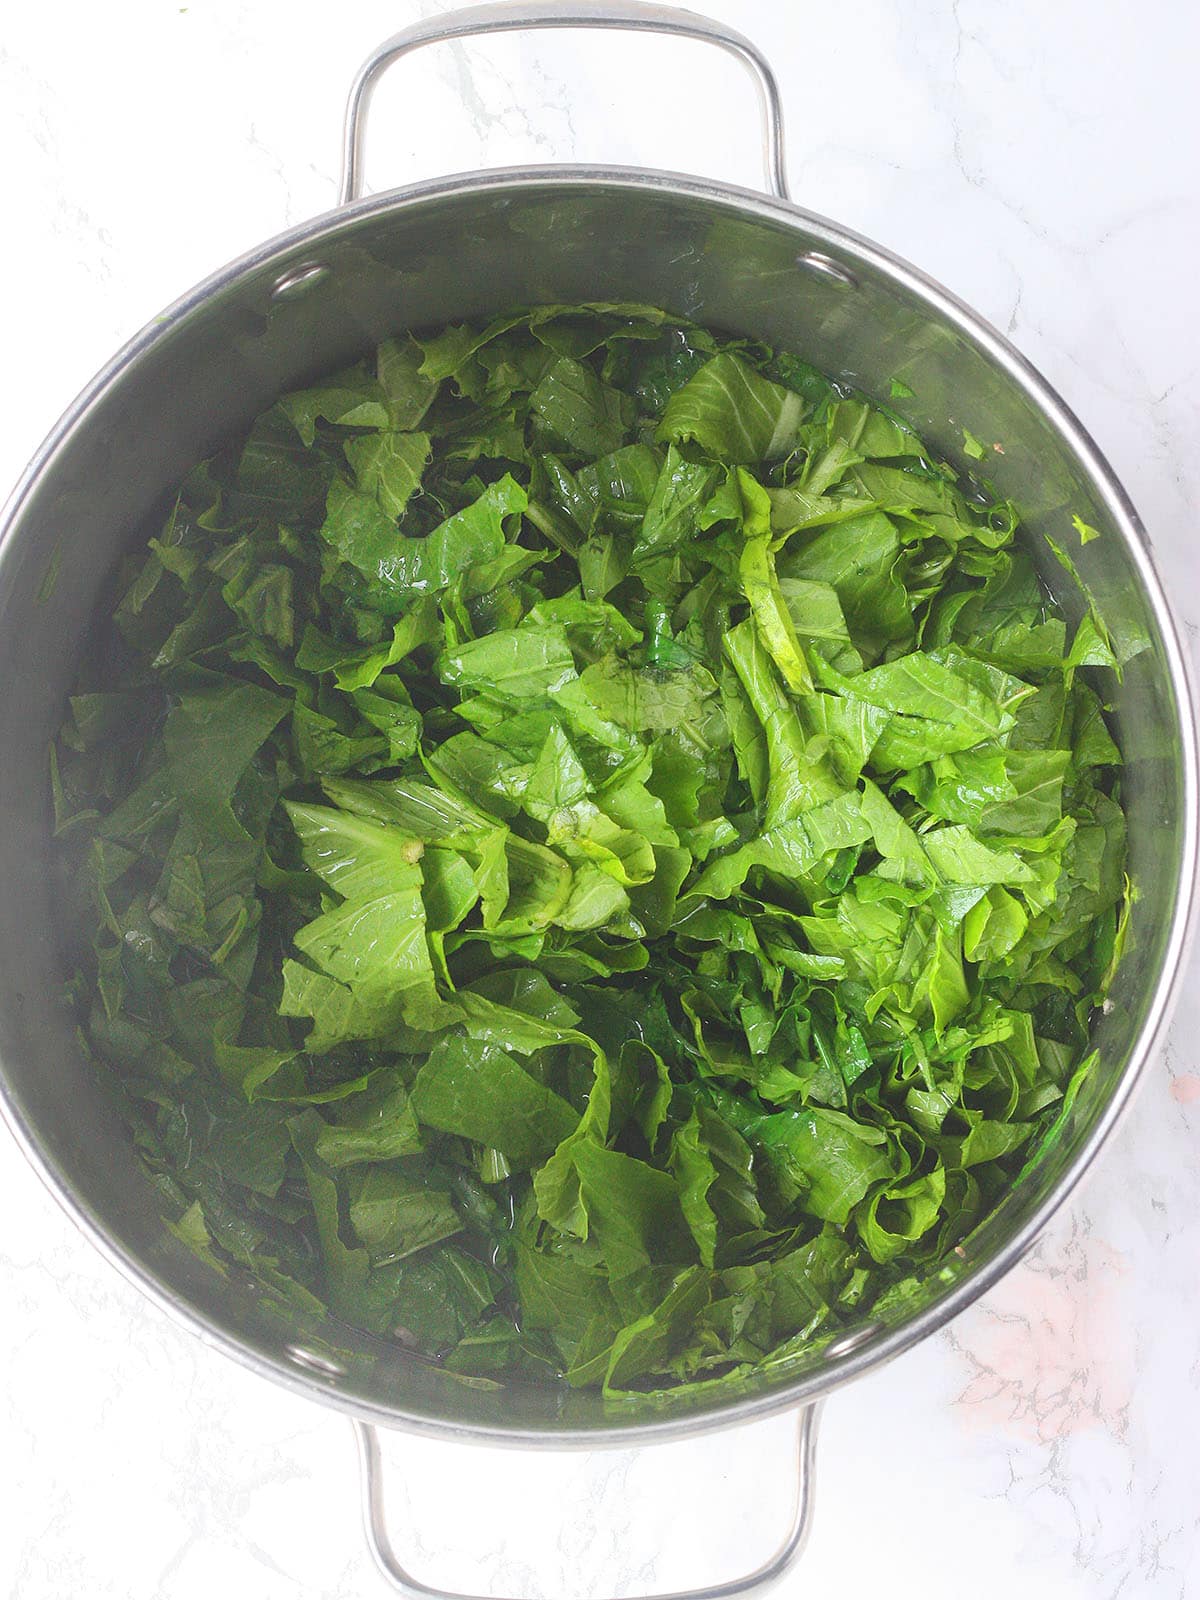 Uncooked chopped turnip greens in a stainless steel pot.